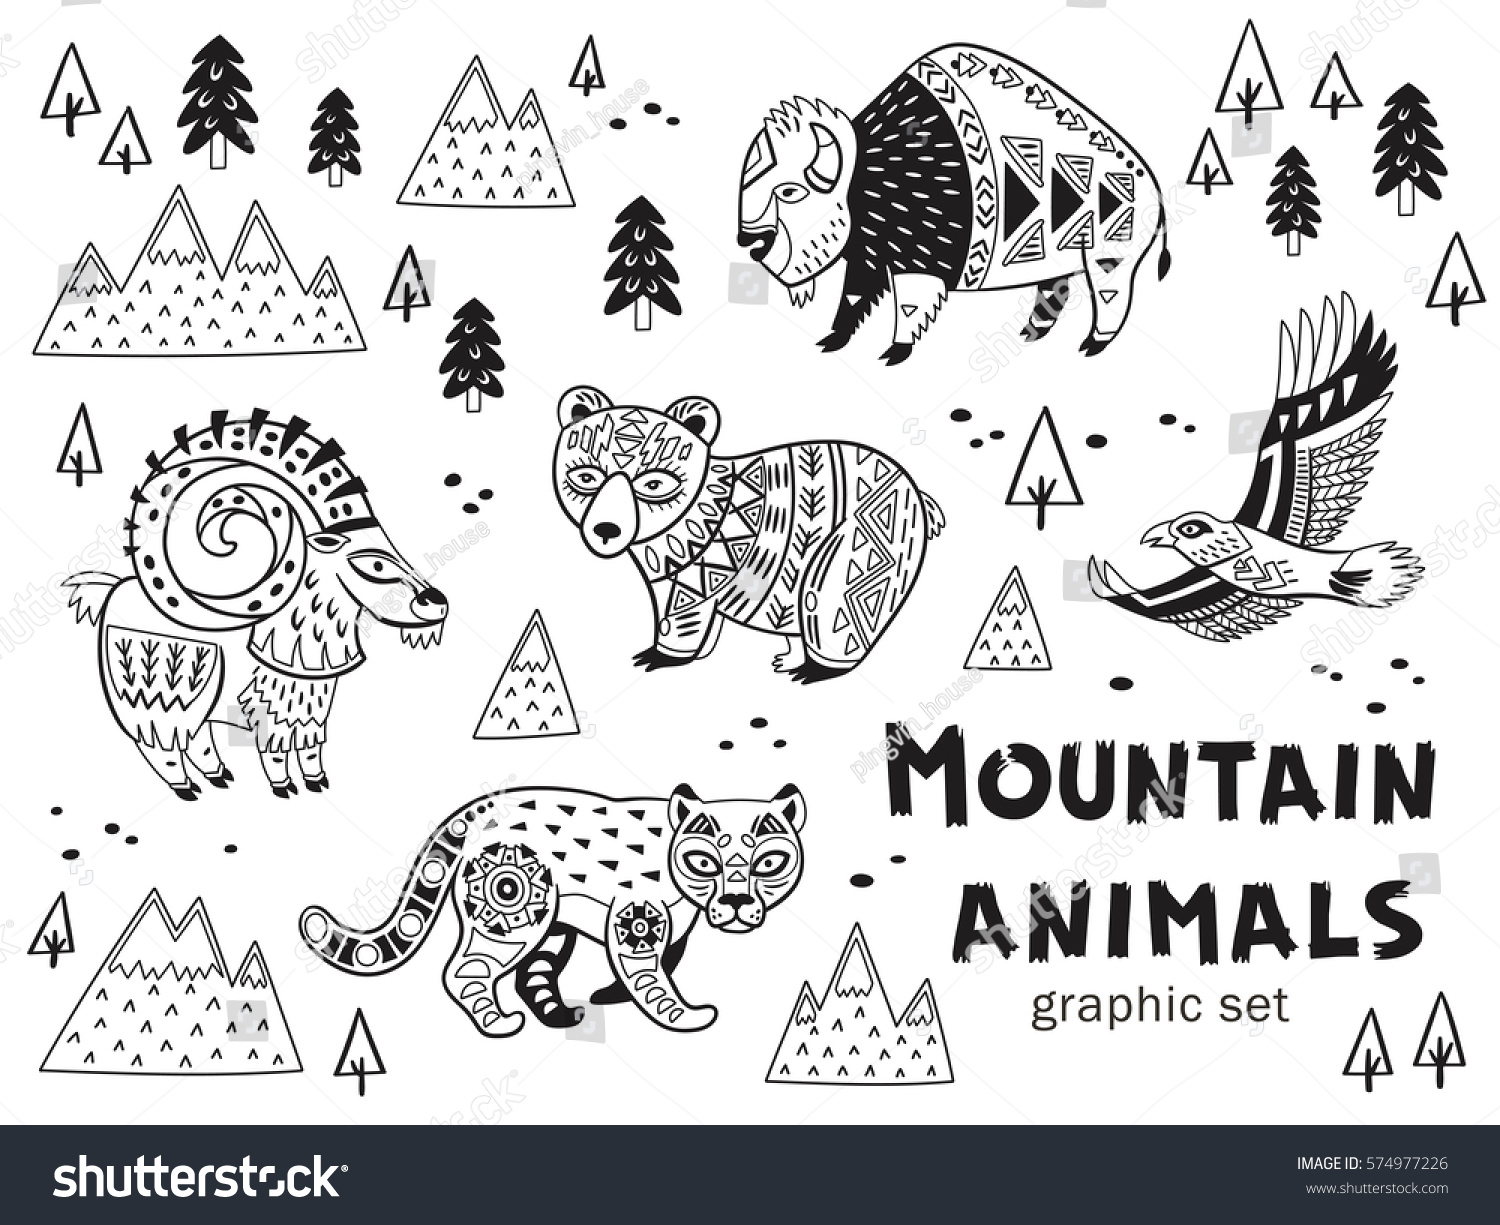 57 Coloring Pages Of Mountain Animals For Free - Hot Coloring Pages